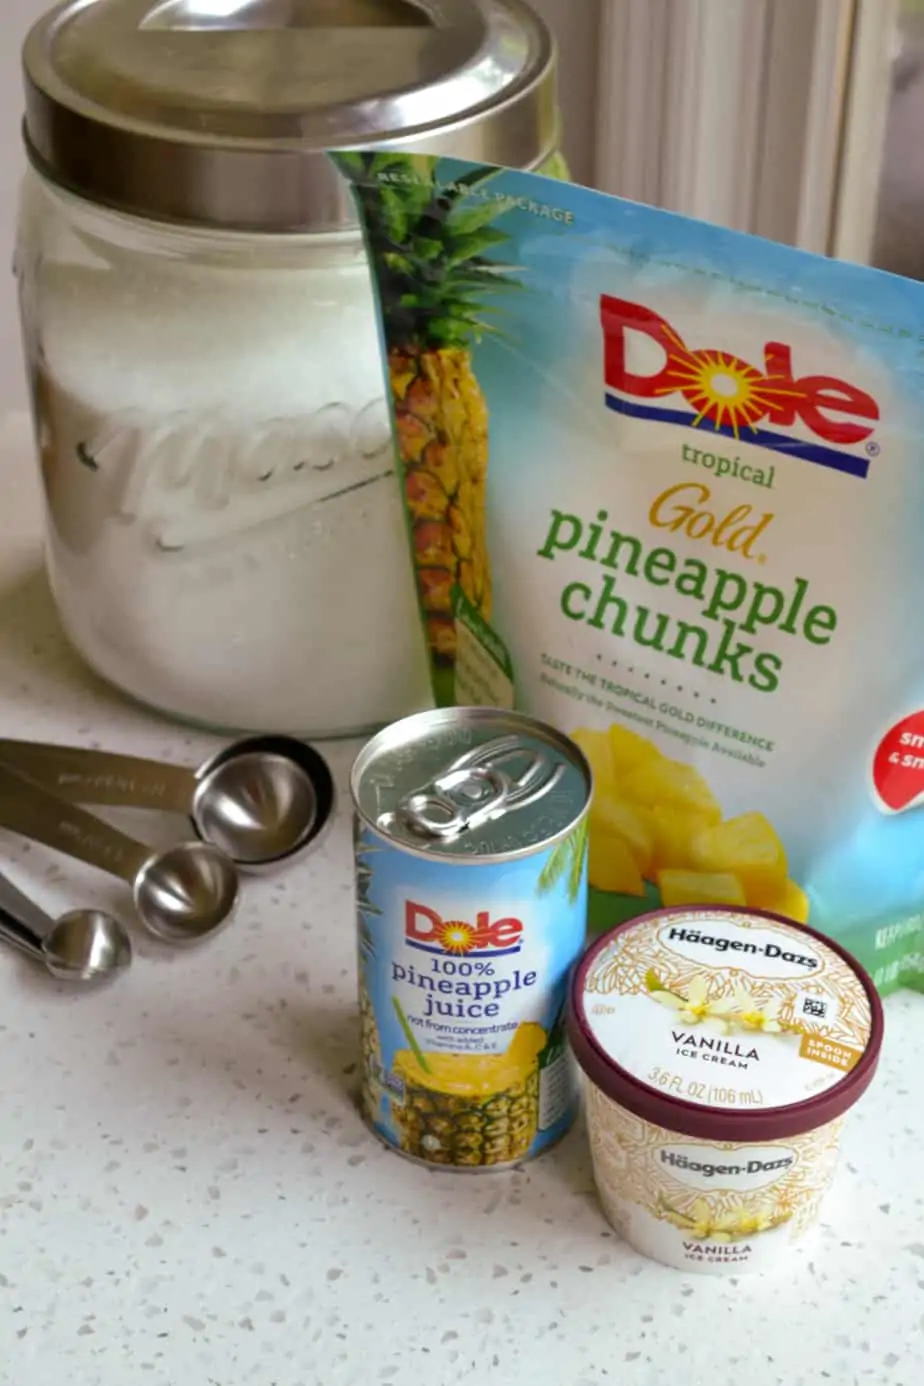 The ingredients needed to make Dole Whip